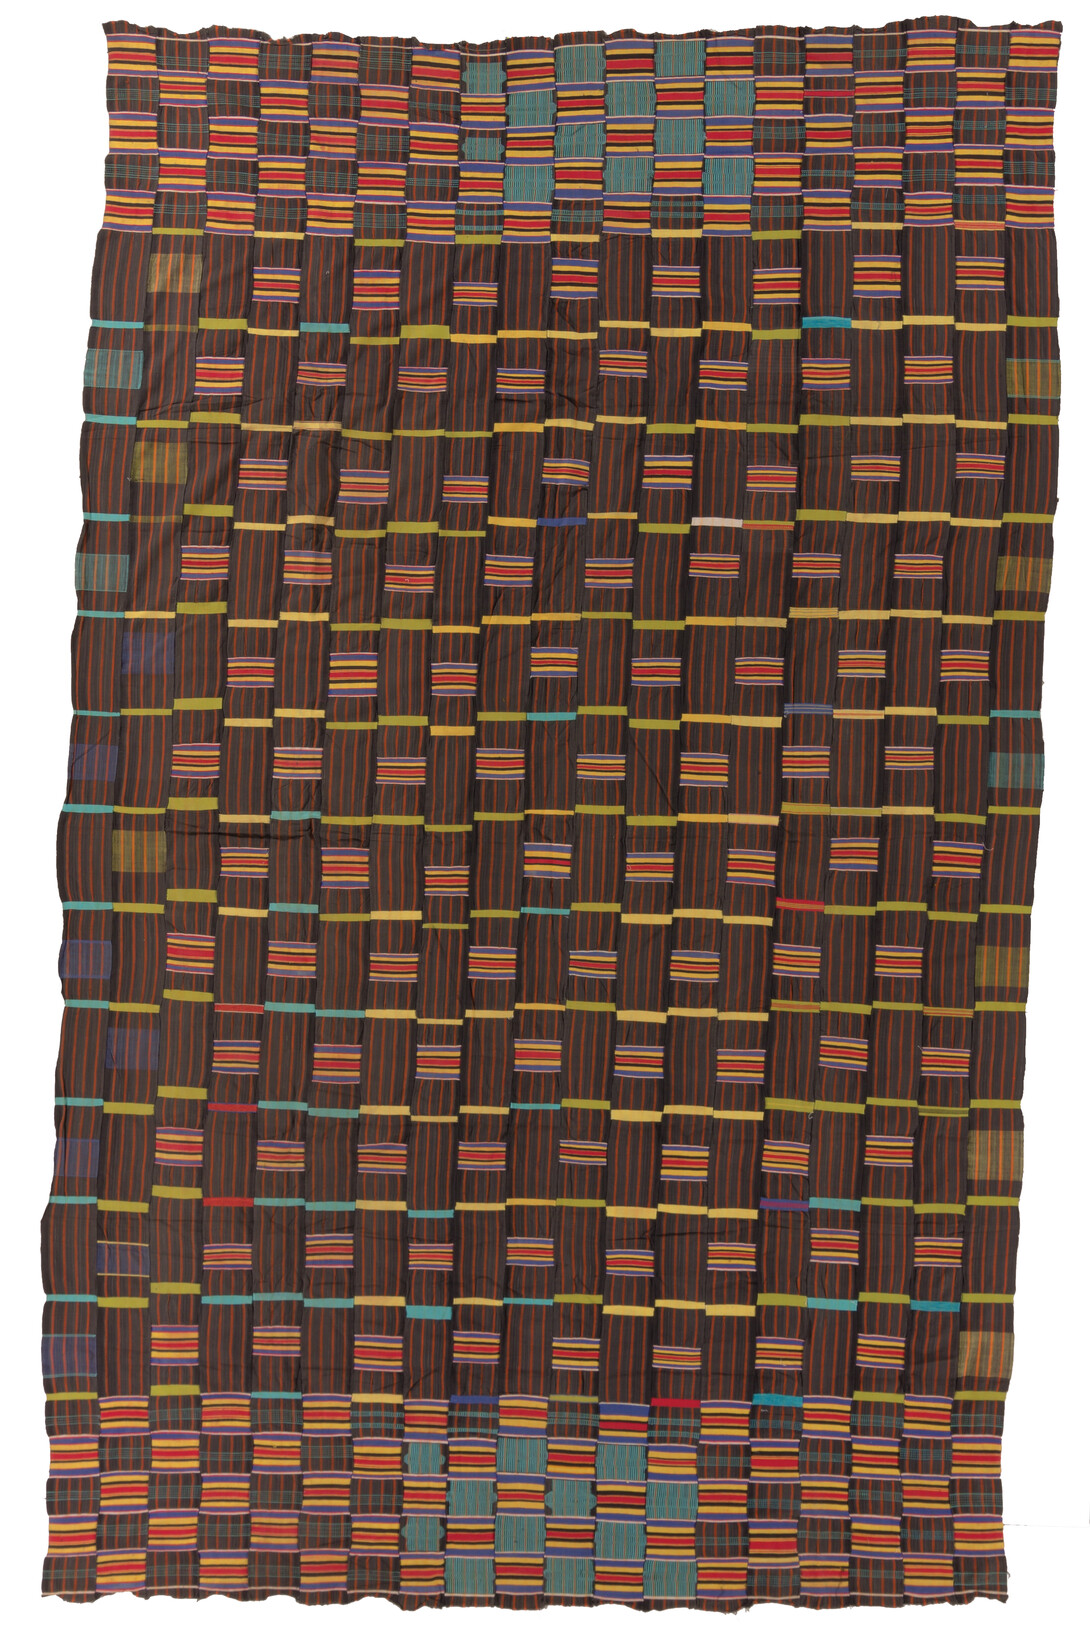 This Kente Cloth made by the Ashanti people circa 1960-1980 will appear in "From Kente to Kuba" at the International Quilt Study Center & Museum.